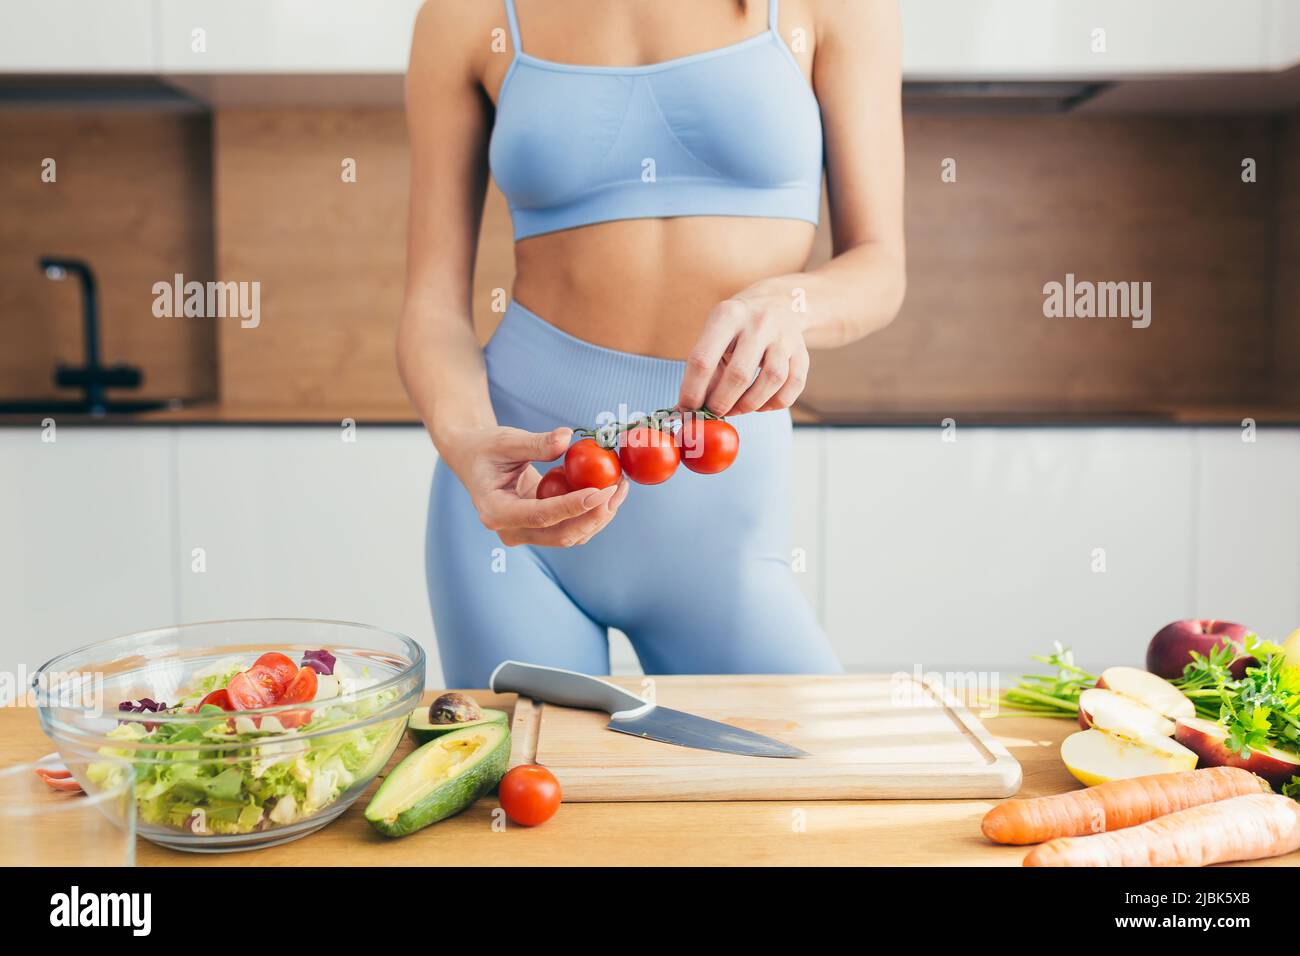 Close up photo, body part, hands of young fitness woman cutting fresh vegetables on kitchen salad at home Stock Photo